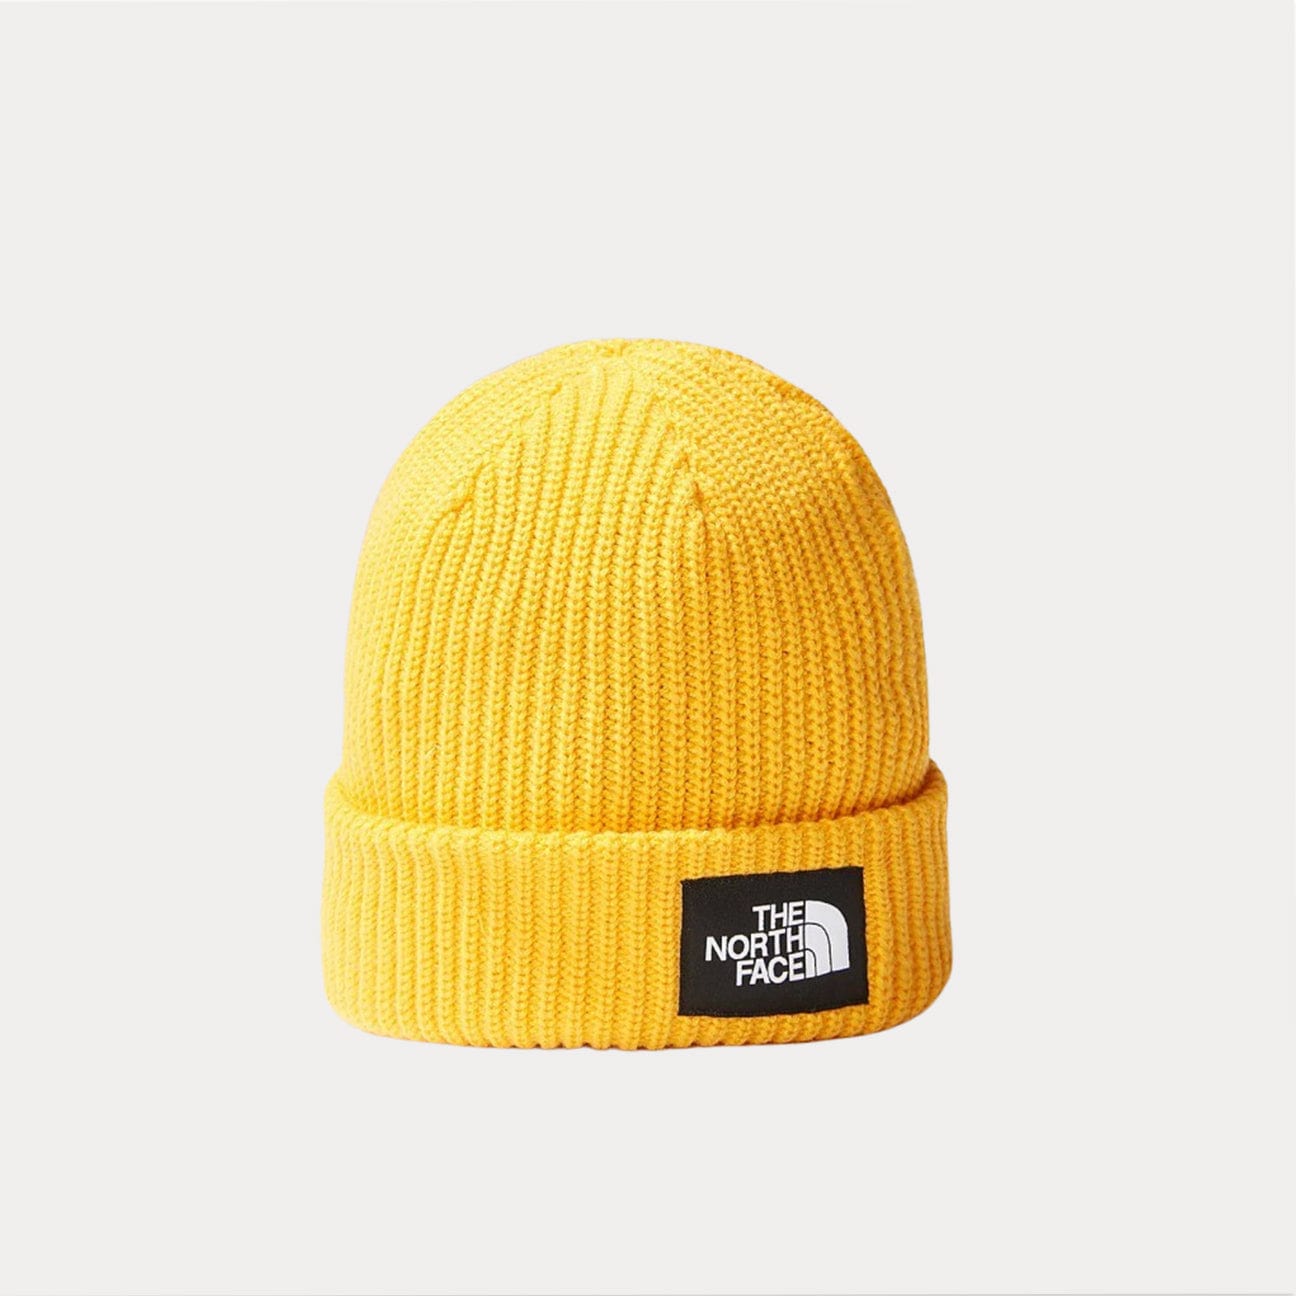 THE NORTH FACE Cappello Beanie Salty Dog Summit Gold